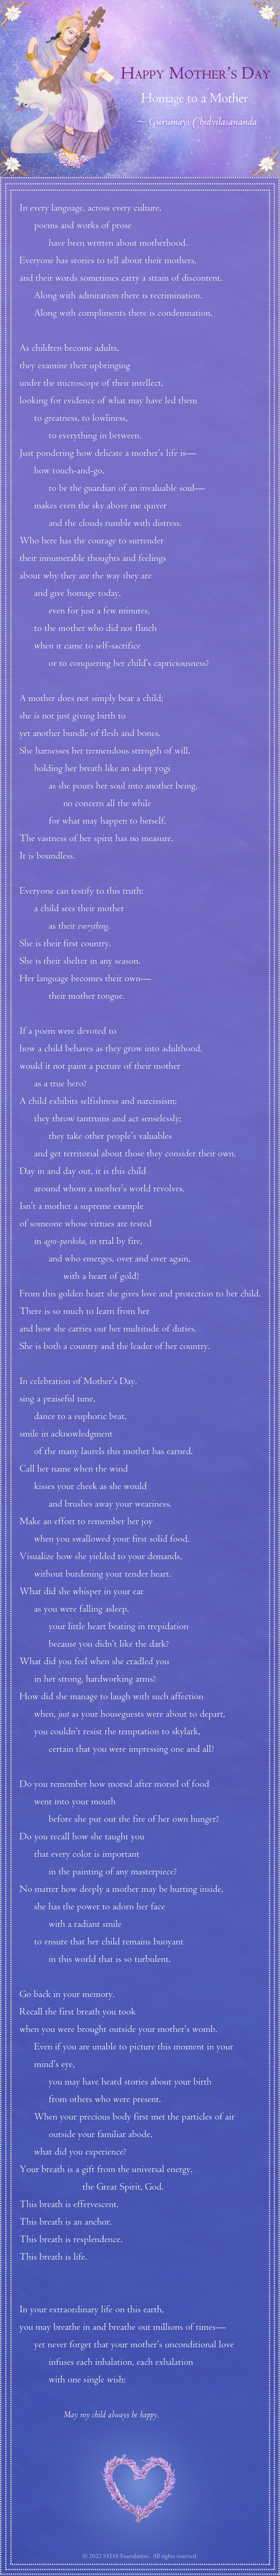 Poem by Gurumayi - Homage to a Mother